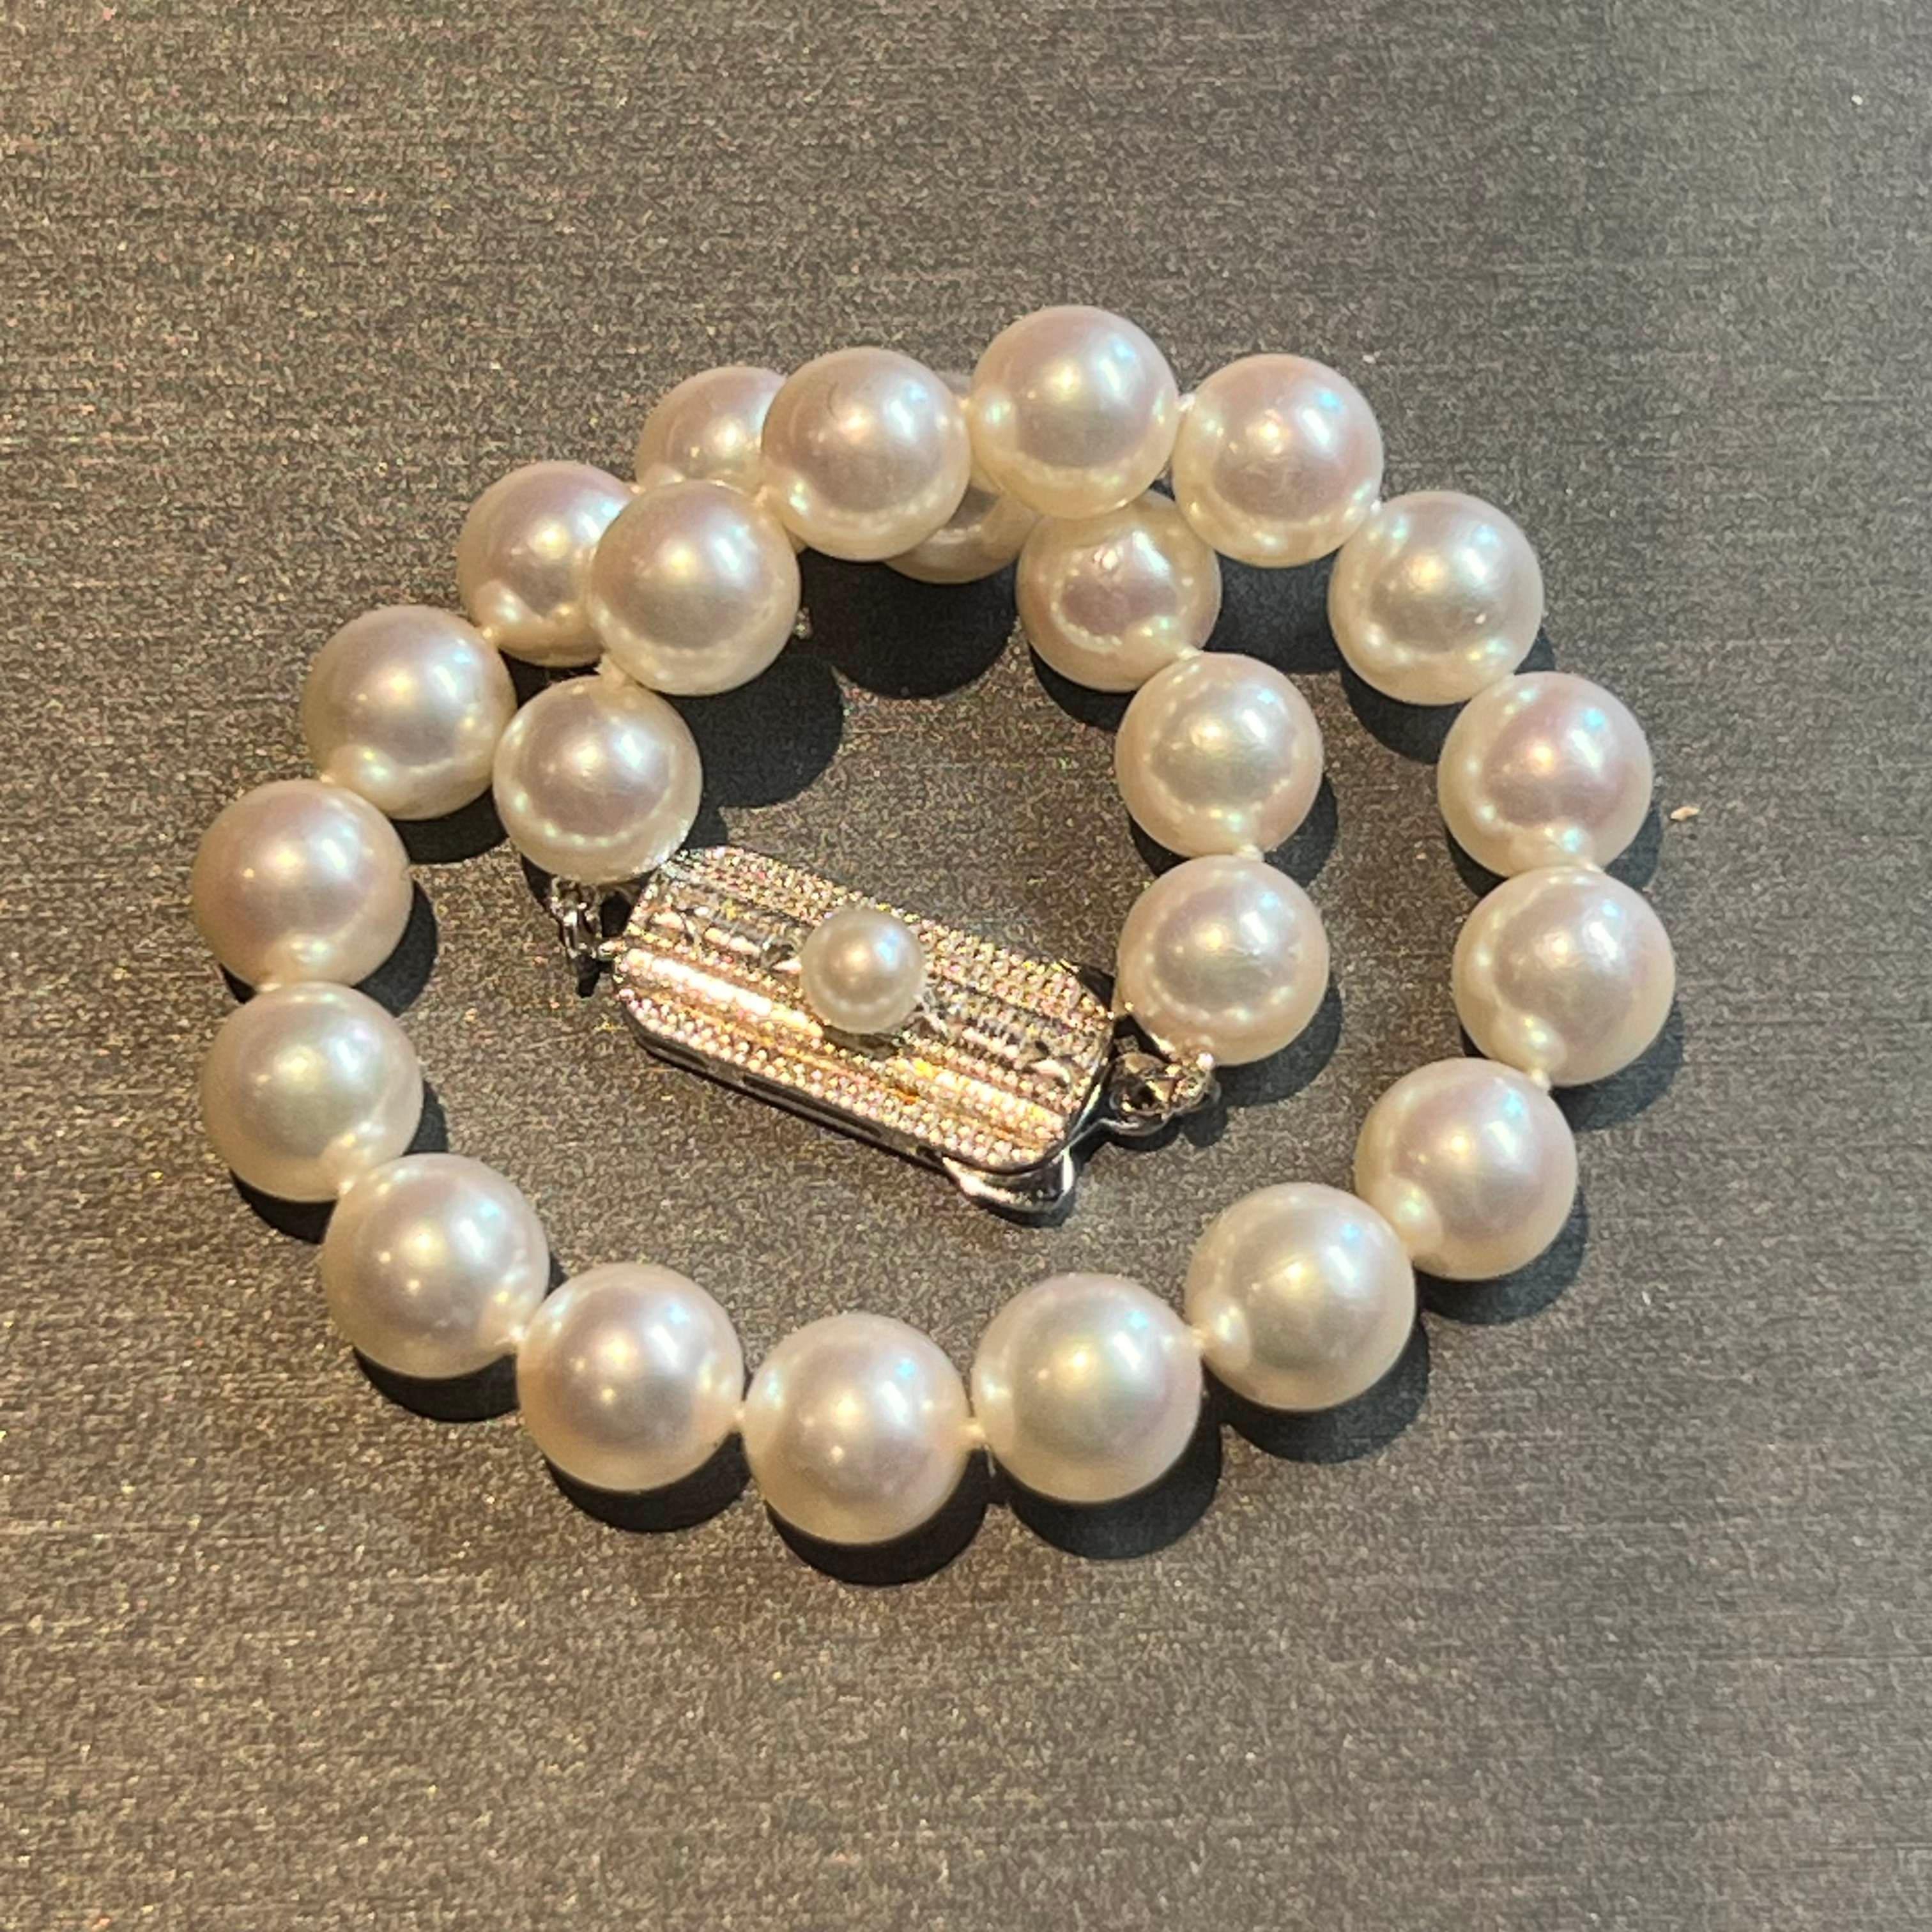 Mikimoto Estate Akoya Pearl Bracelet 7.25 Silver 6.5 - 7 mm In Good Condition For Sale In Brooklyn, NY